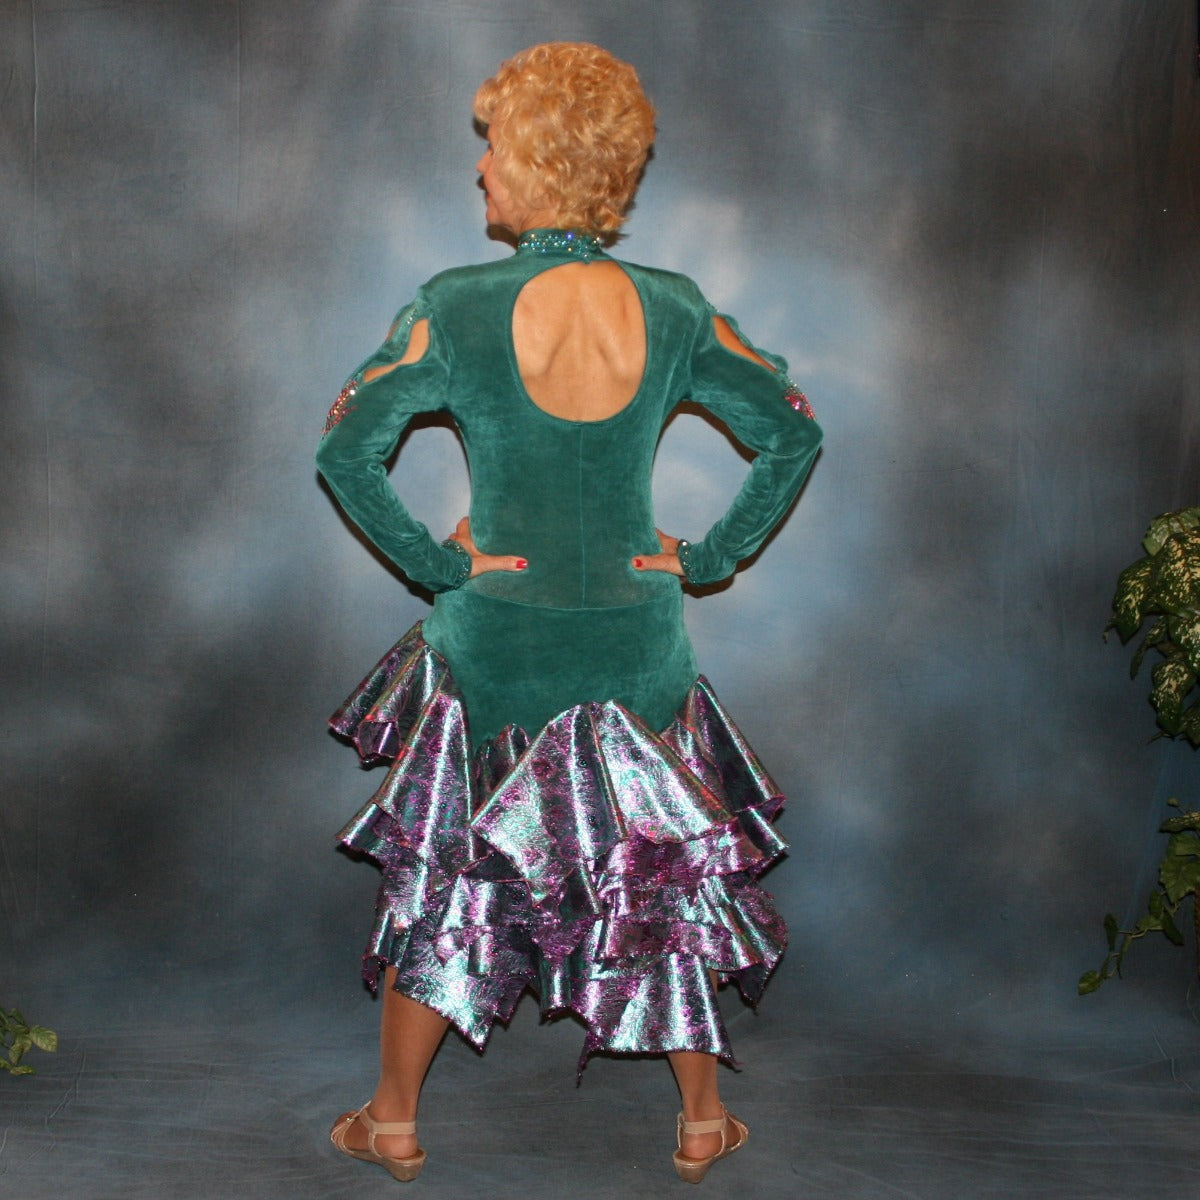 Crystal's Creations back view of Teal Latin/rhythm dress was created in luxurious teal solid slinky with teal & rose metallic brocade peacock print flounces, & embellished with fuchsia Swarovski rhinestone detailing